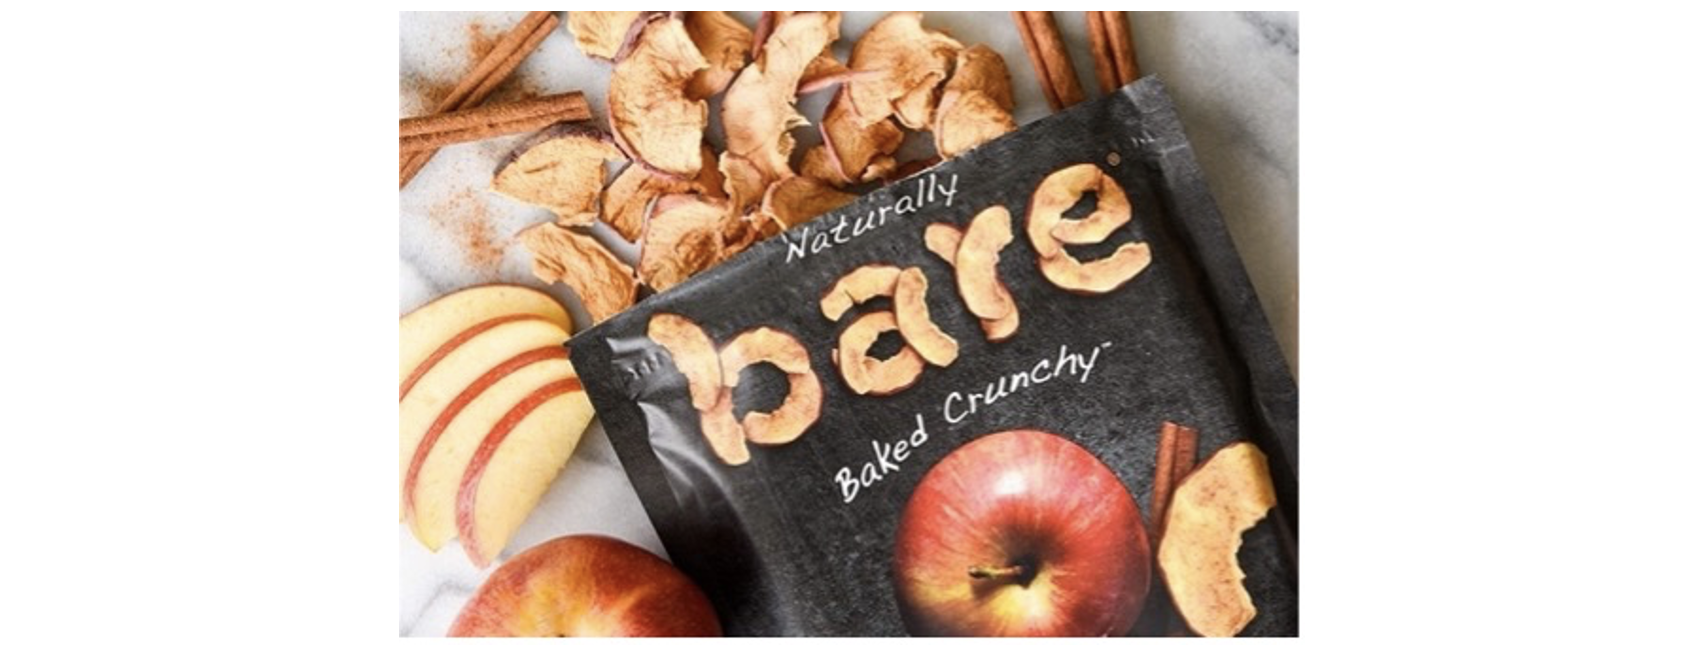 BARE SNACKS: Snacks and Confectionery Trend